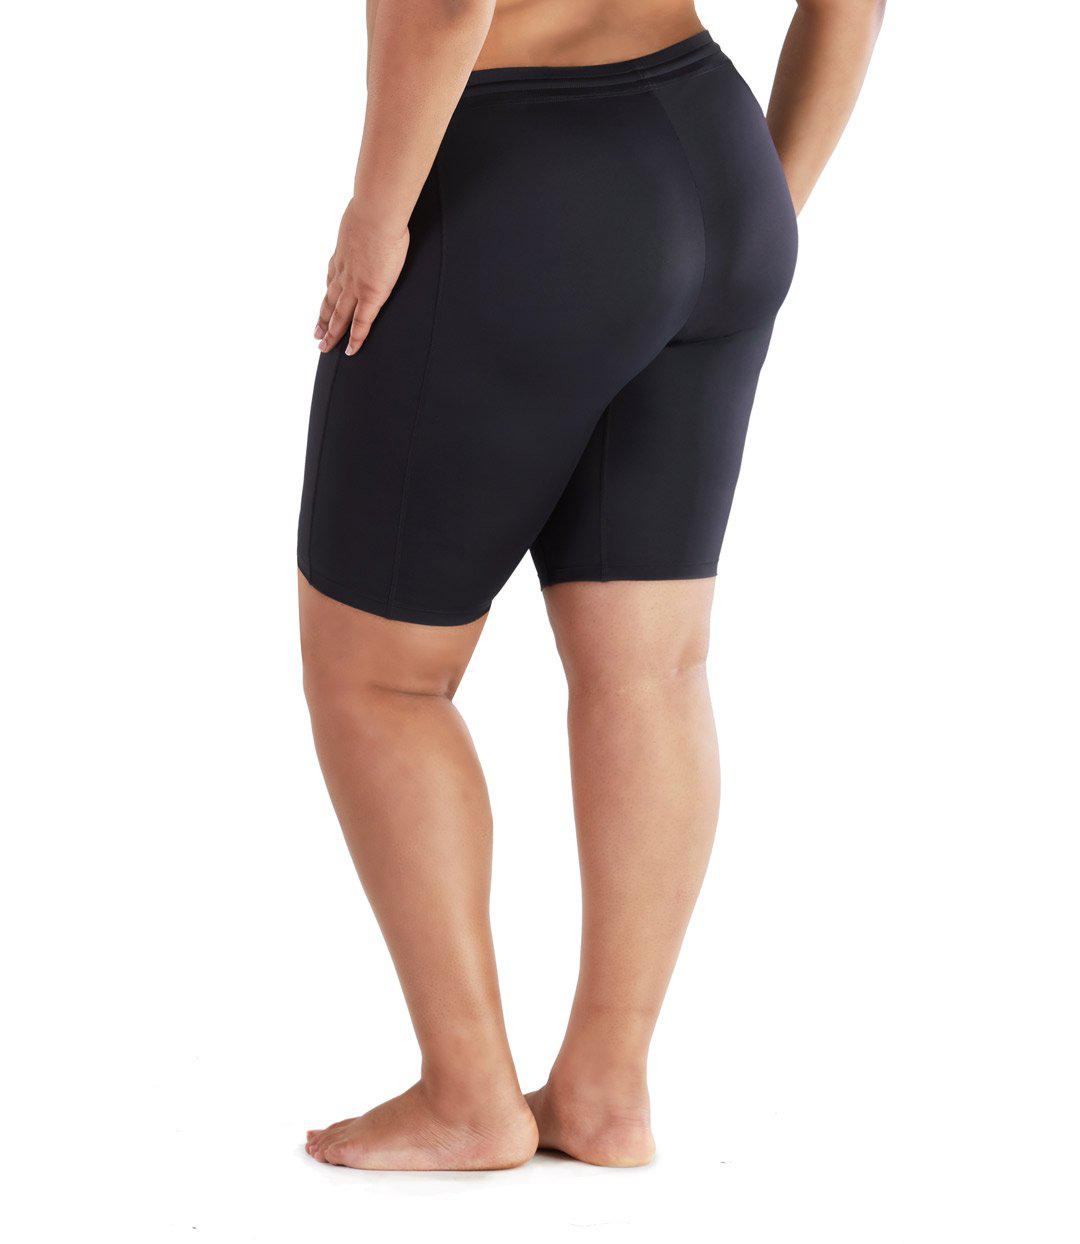 Bottom half of plus size woman facing back wearing JunoActive QuikEnergy Fitted Swim Short. The short is black and is tight to the body. The hem is just above the knee.